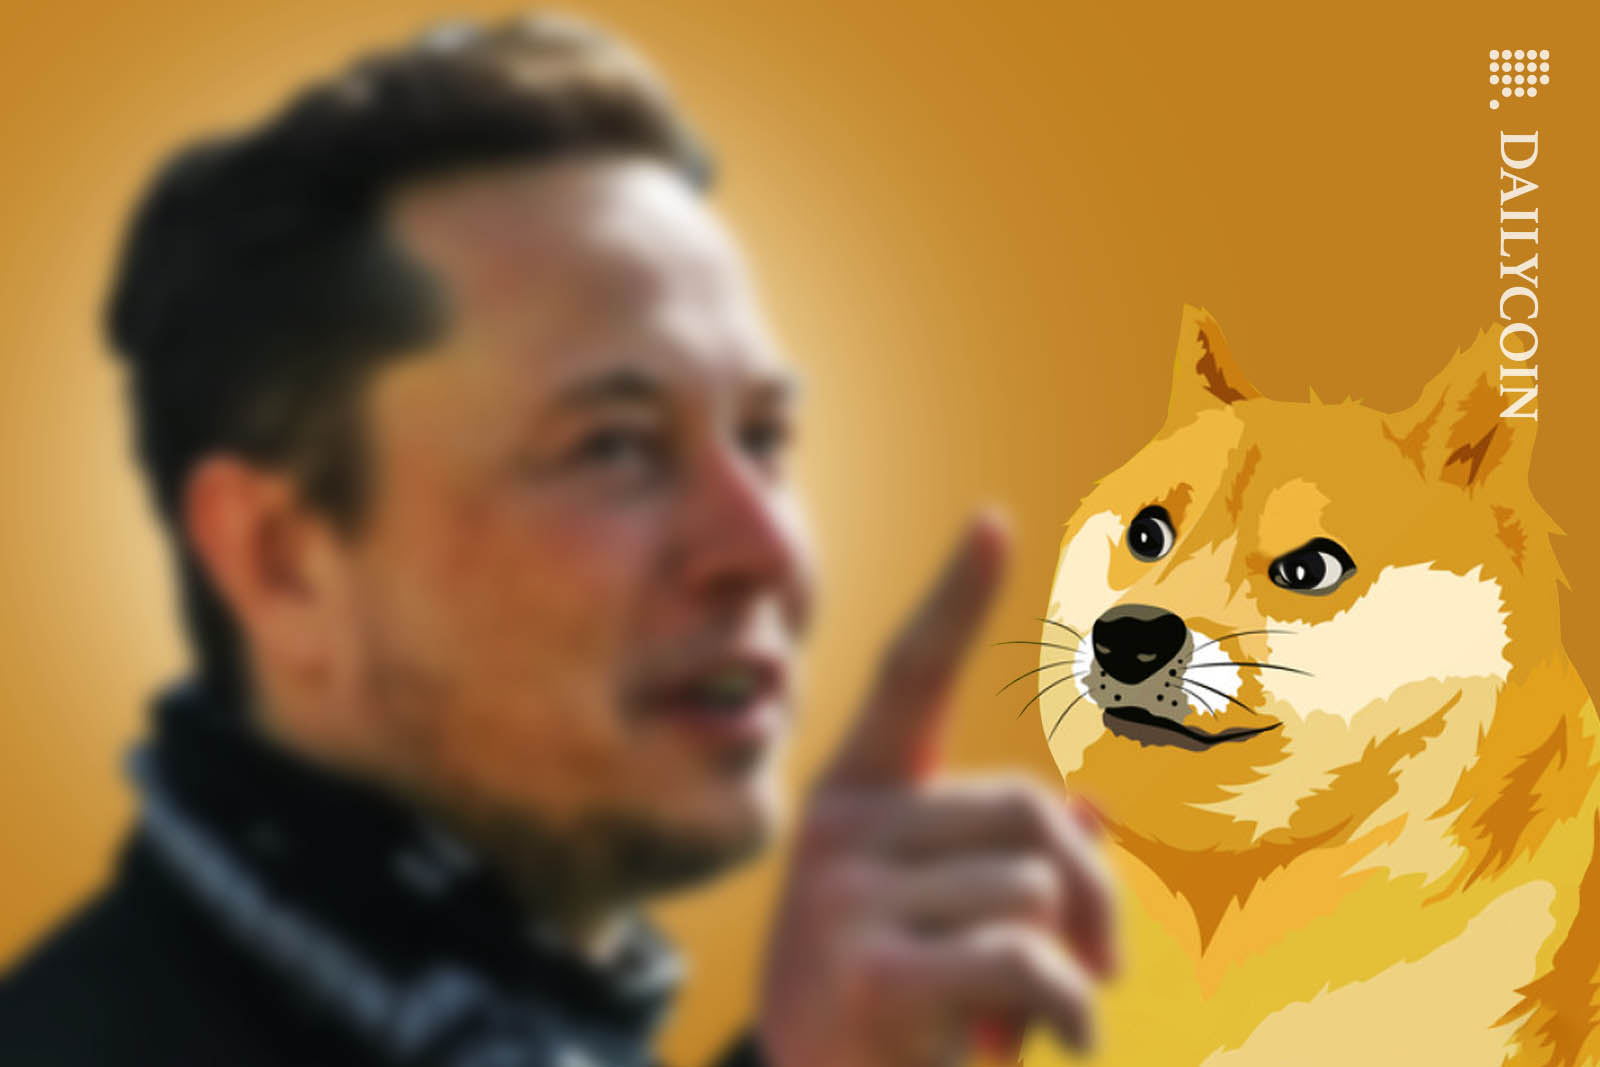 Elon Musk warning people about Dogecoin, angry dog staring at him in the background.